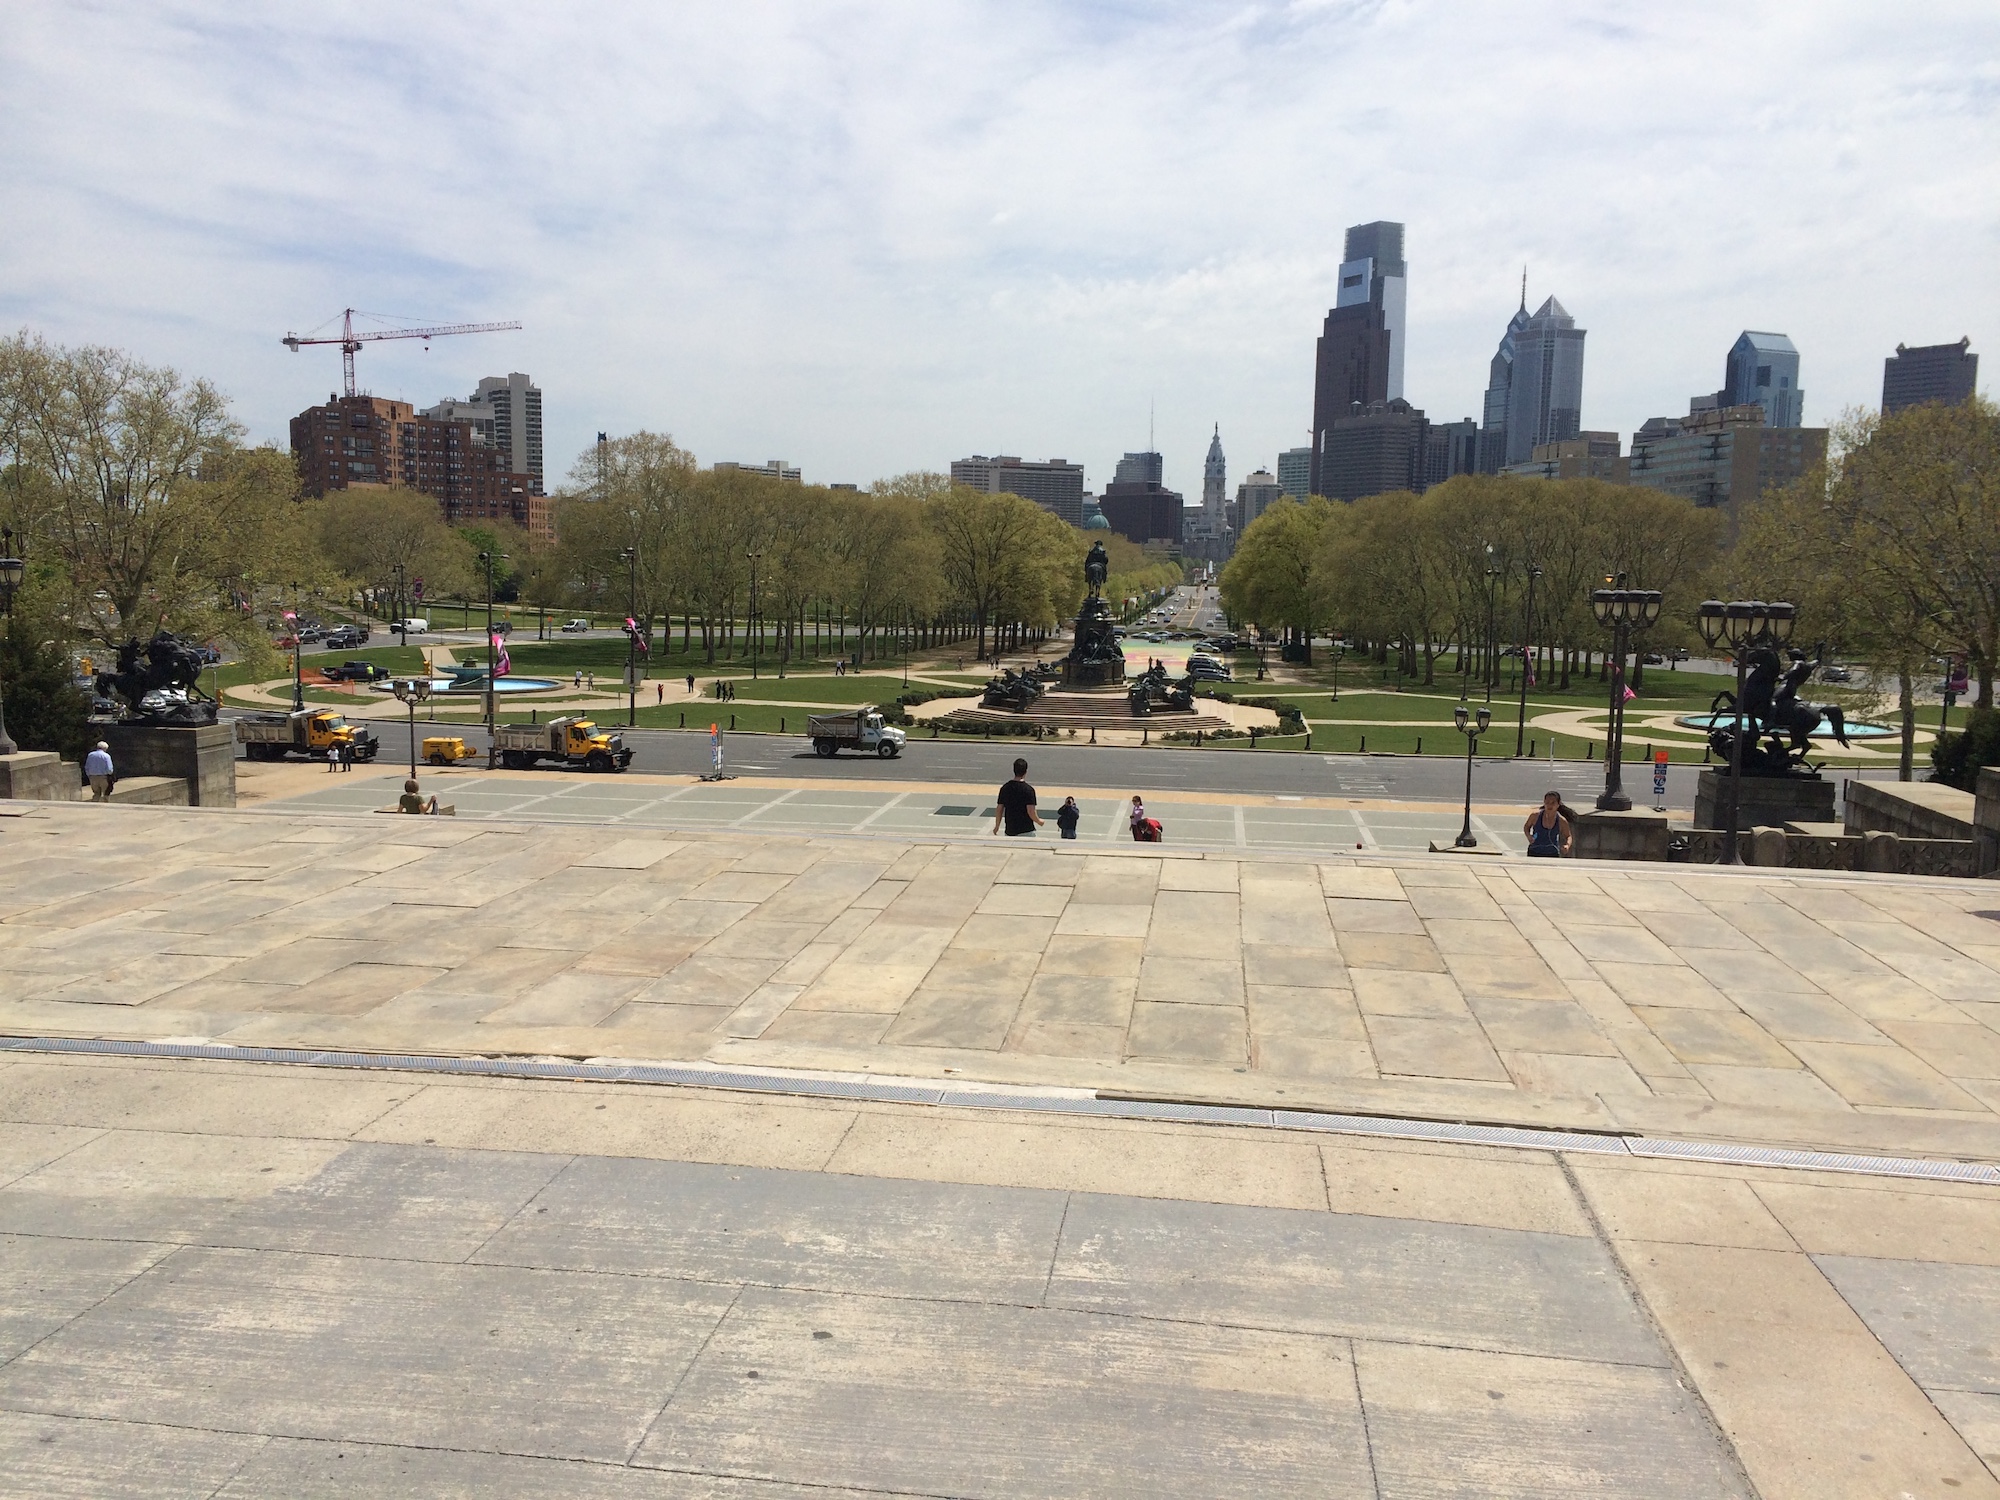 At the top of the Rocky Steps